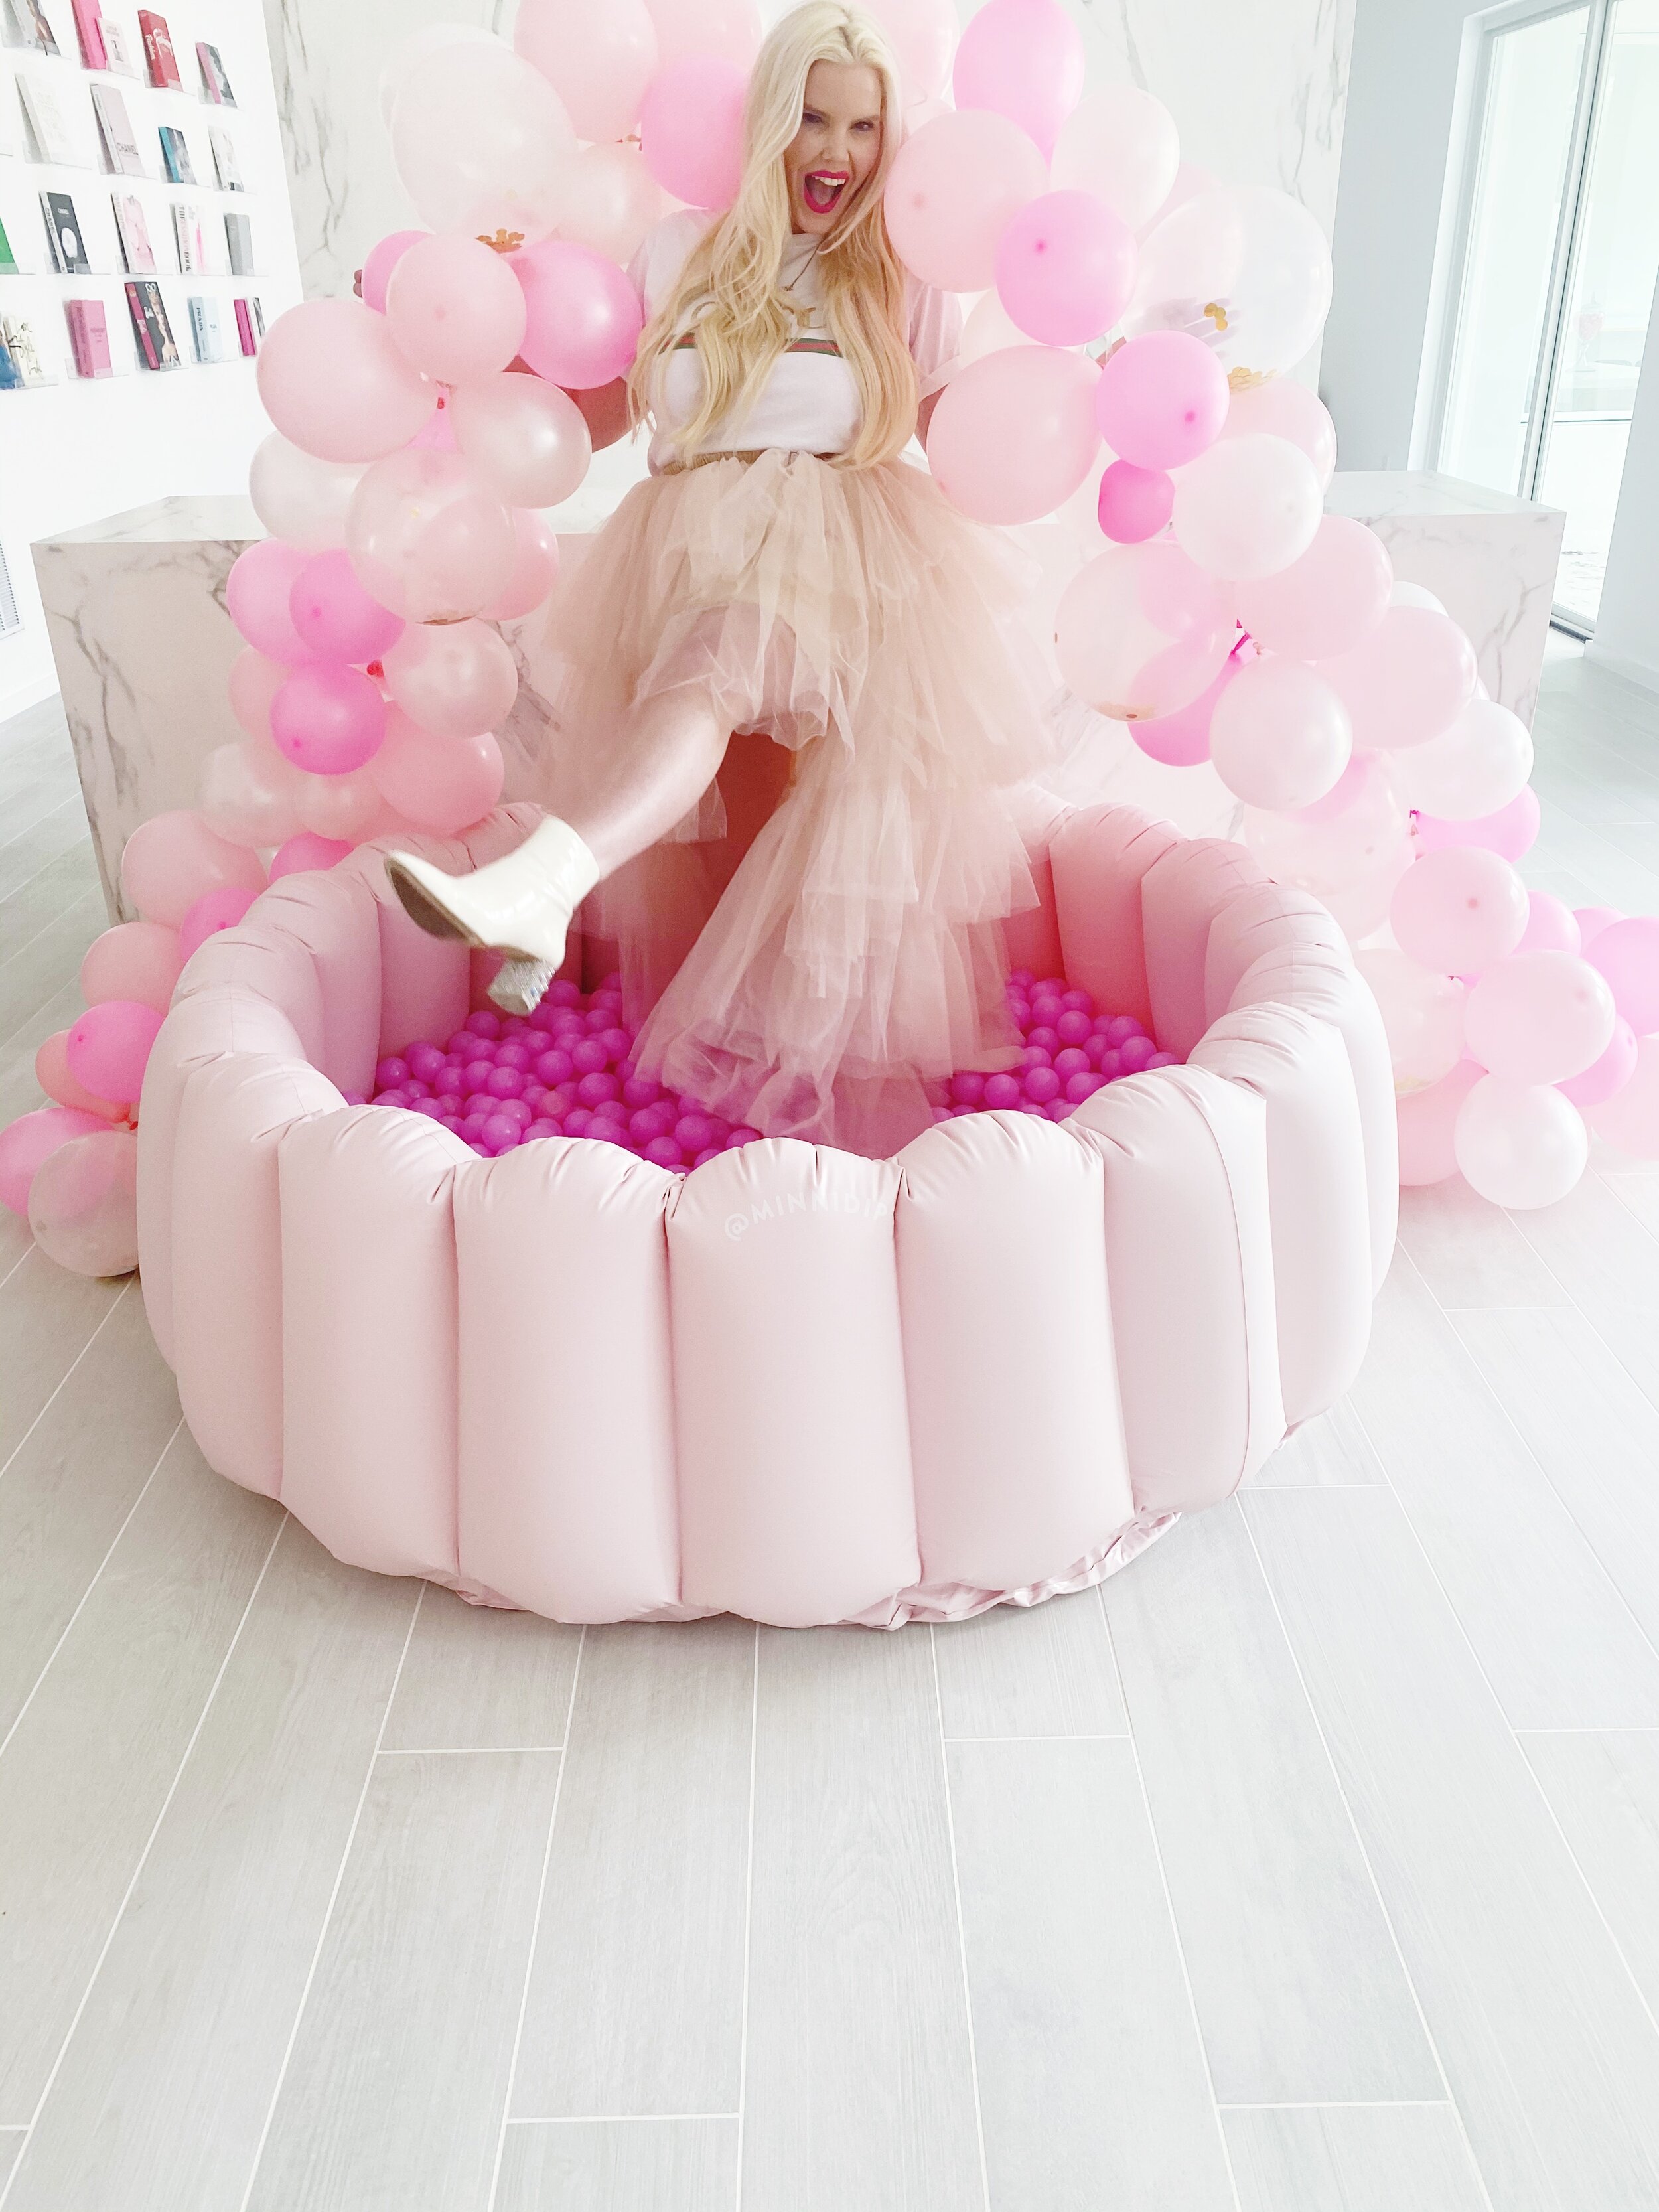 The-Caroline-Doll-Birthday-Pink-Ball-Pit-Minnidip-Inflatable-Pool-Luxury-Office-Goals-Party-Lifestyle-3.JPG